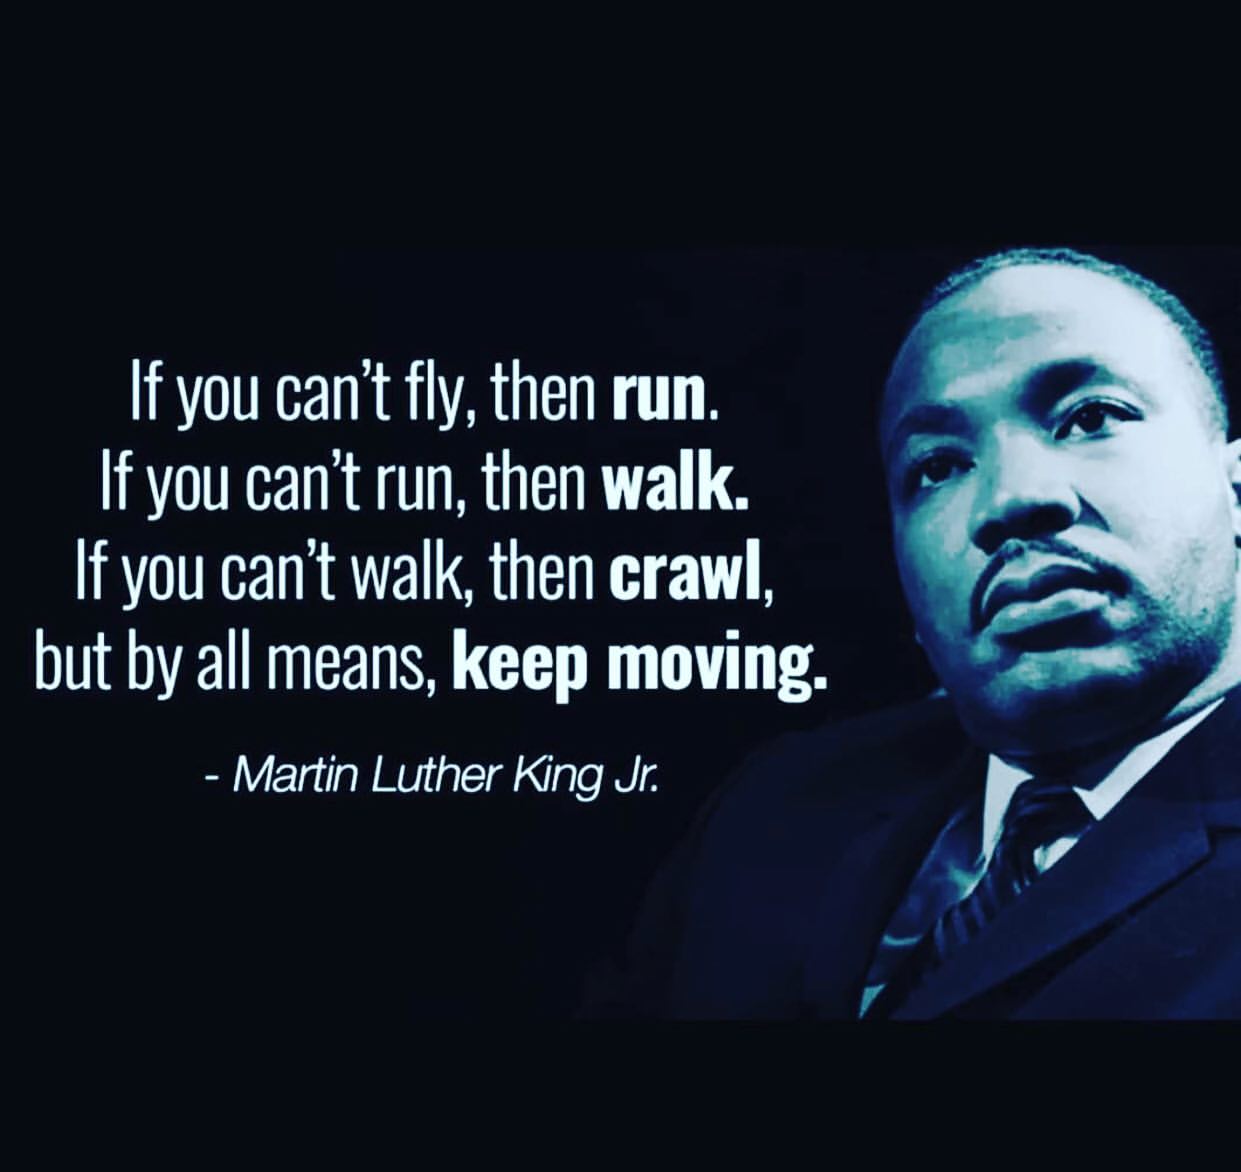 If you can't fly, then run. If you can't run, then walk. If you can't walk, then crawl, but by all means, keep moving. Martin Luther King Jr.